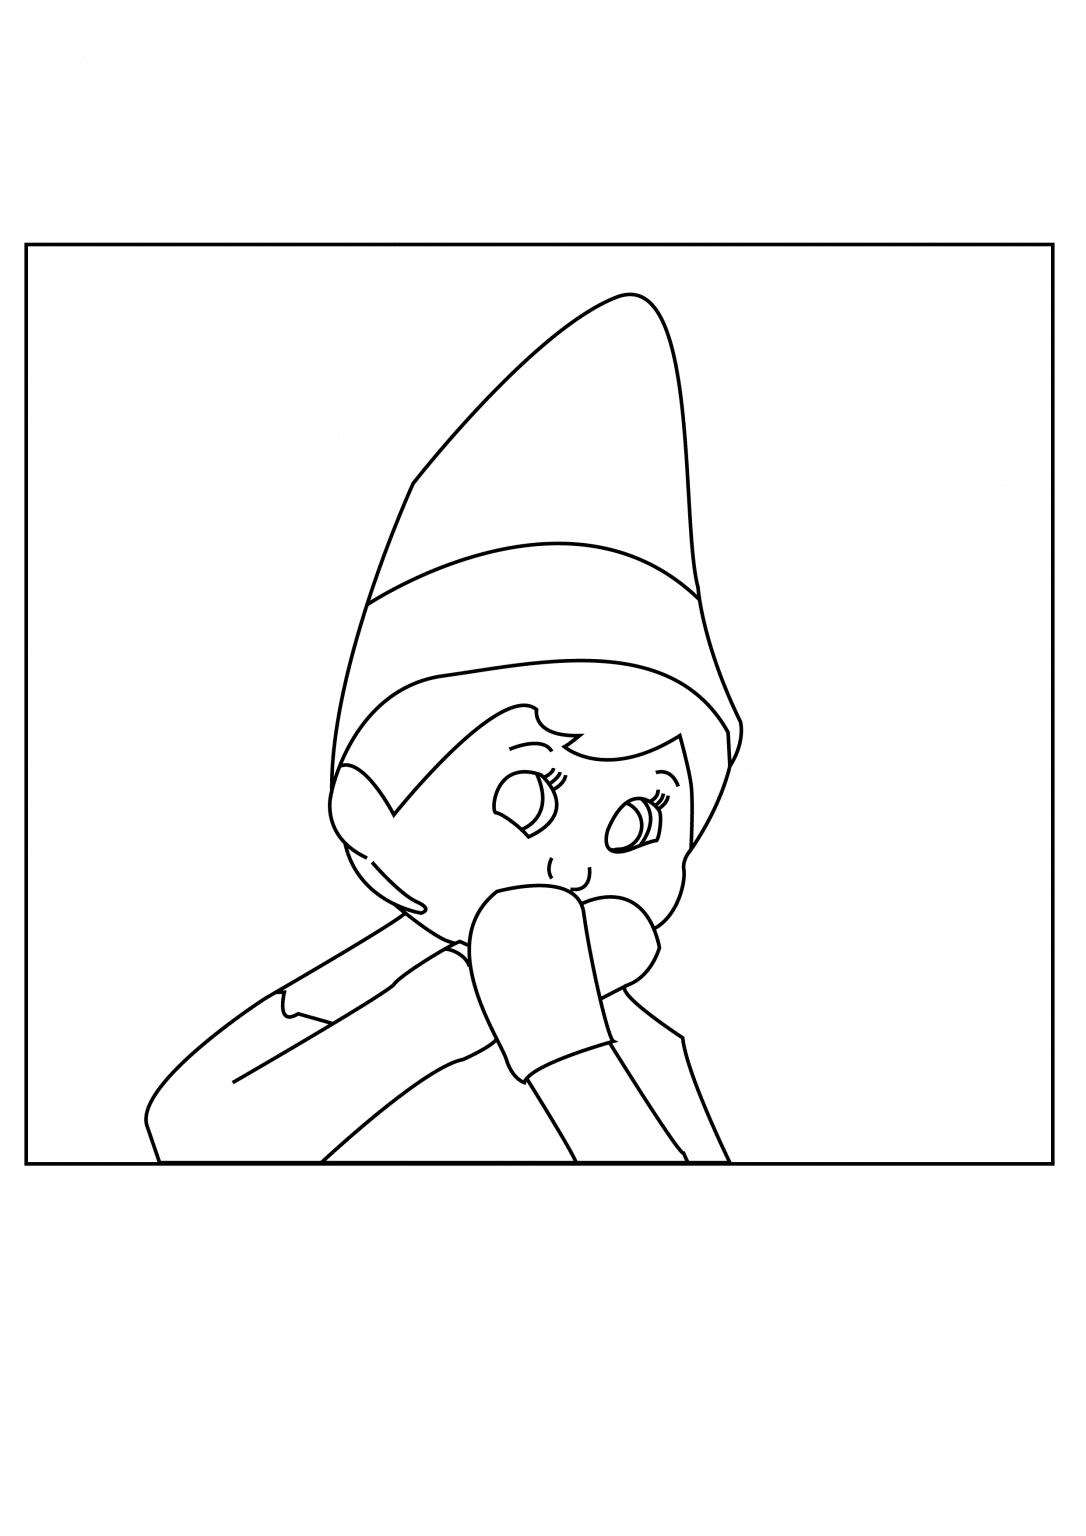 Free Printable Elf on The Shelf Coloring Pages - Tulamama